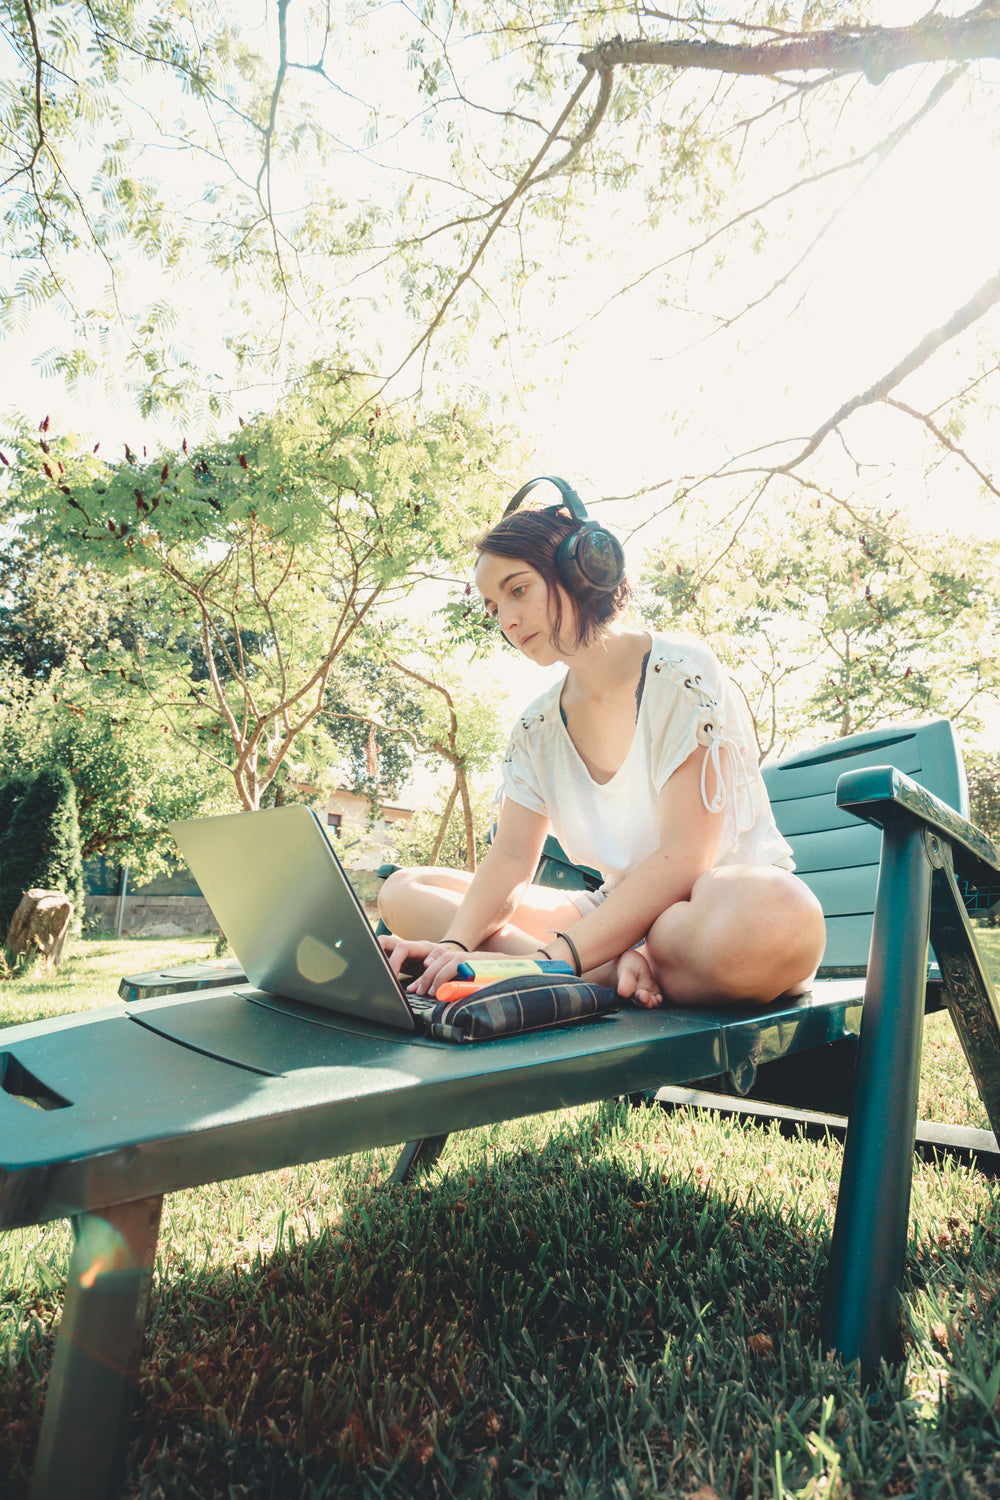 woman works on her laptop outdoors in green lawn chair